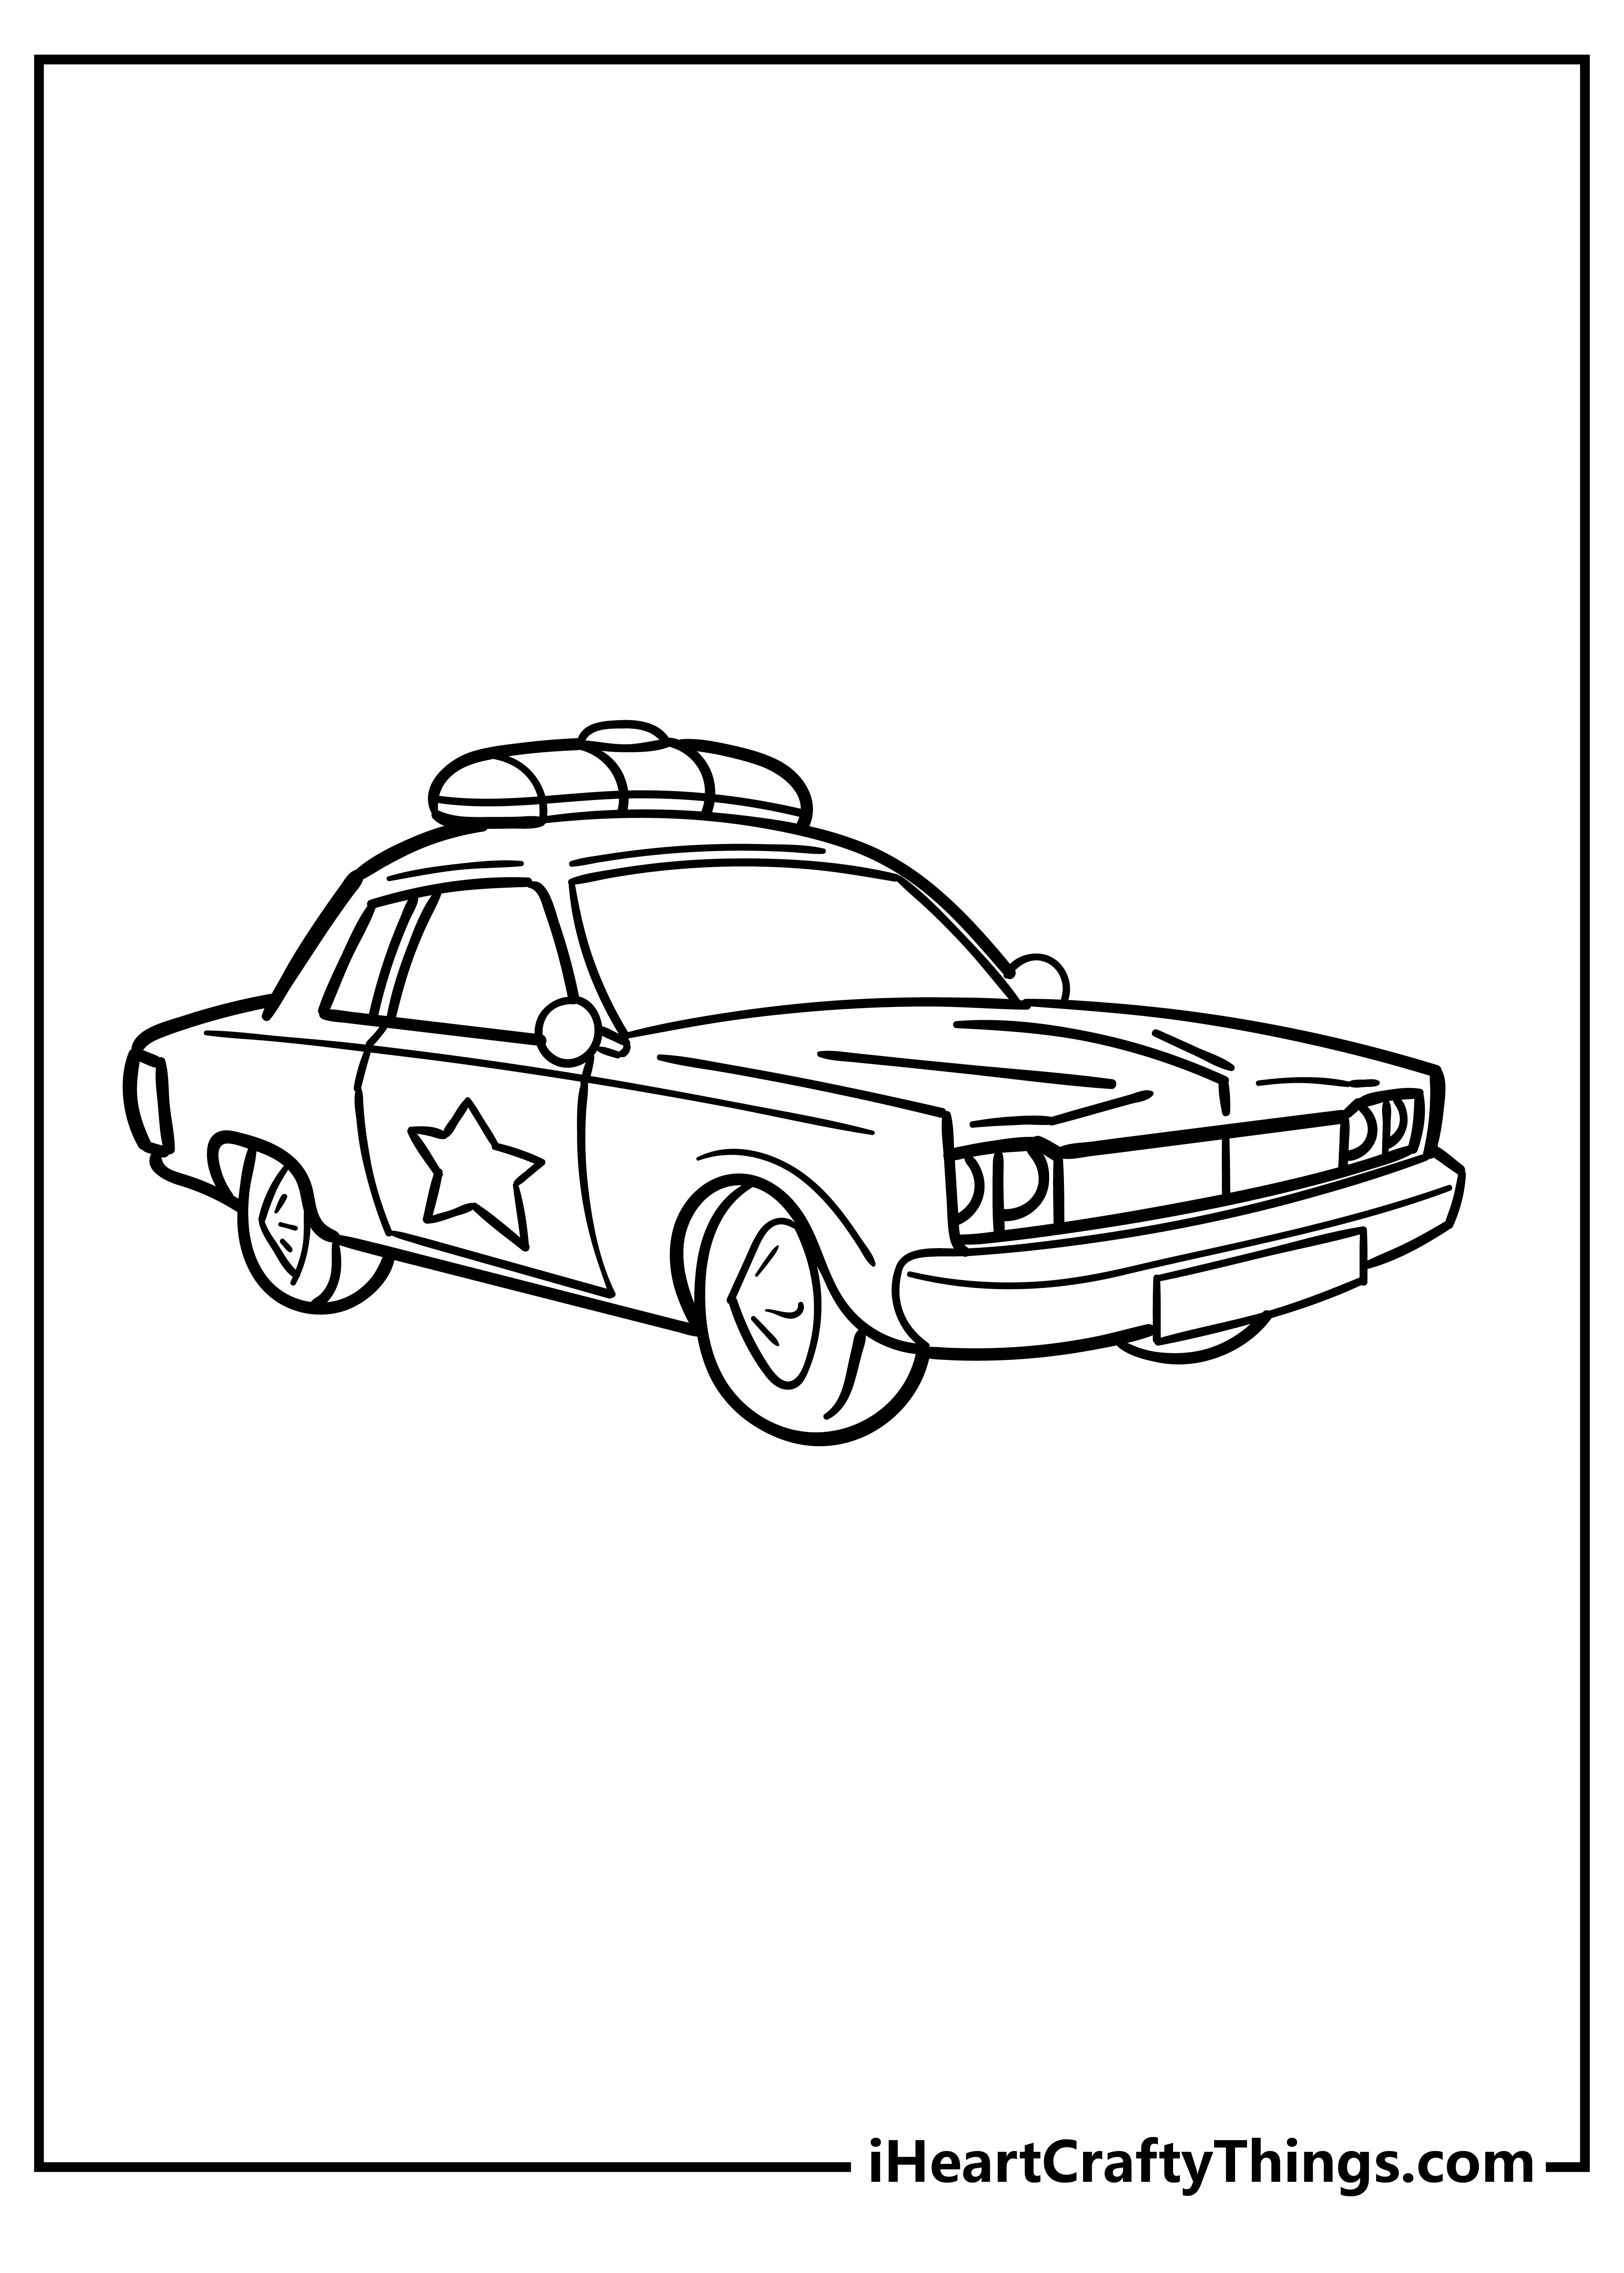 Police Car Coloring Pages free pdf download